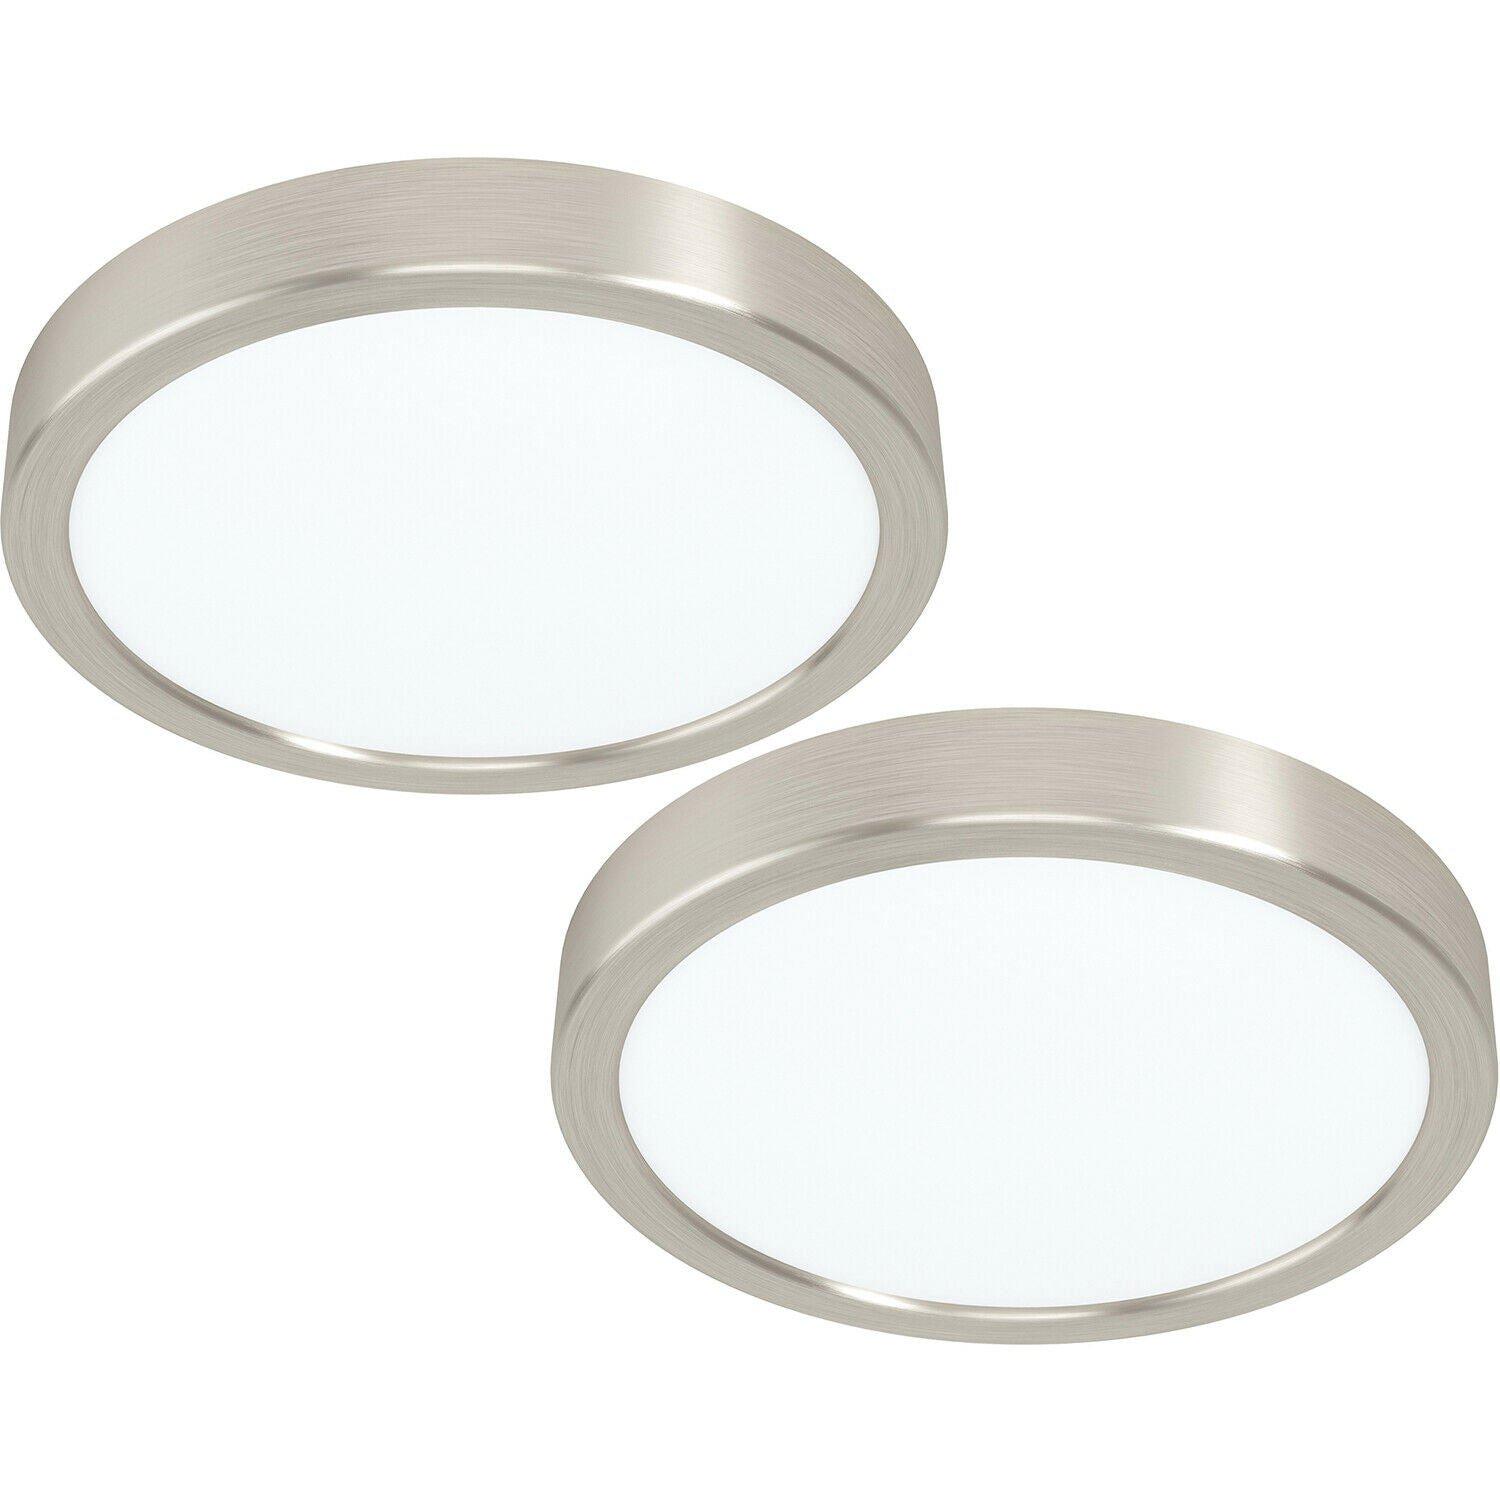 2 PACK Wall / Ceiling Light Satin Nickel 210mm Round Surface 16.5W LED 3000K